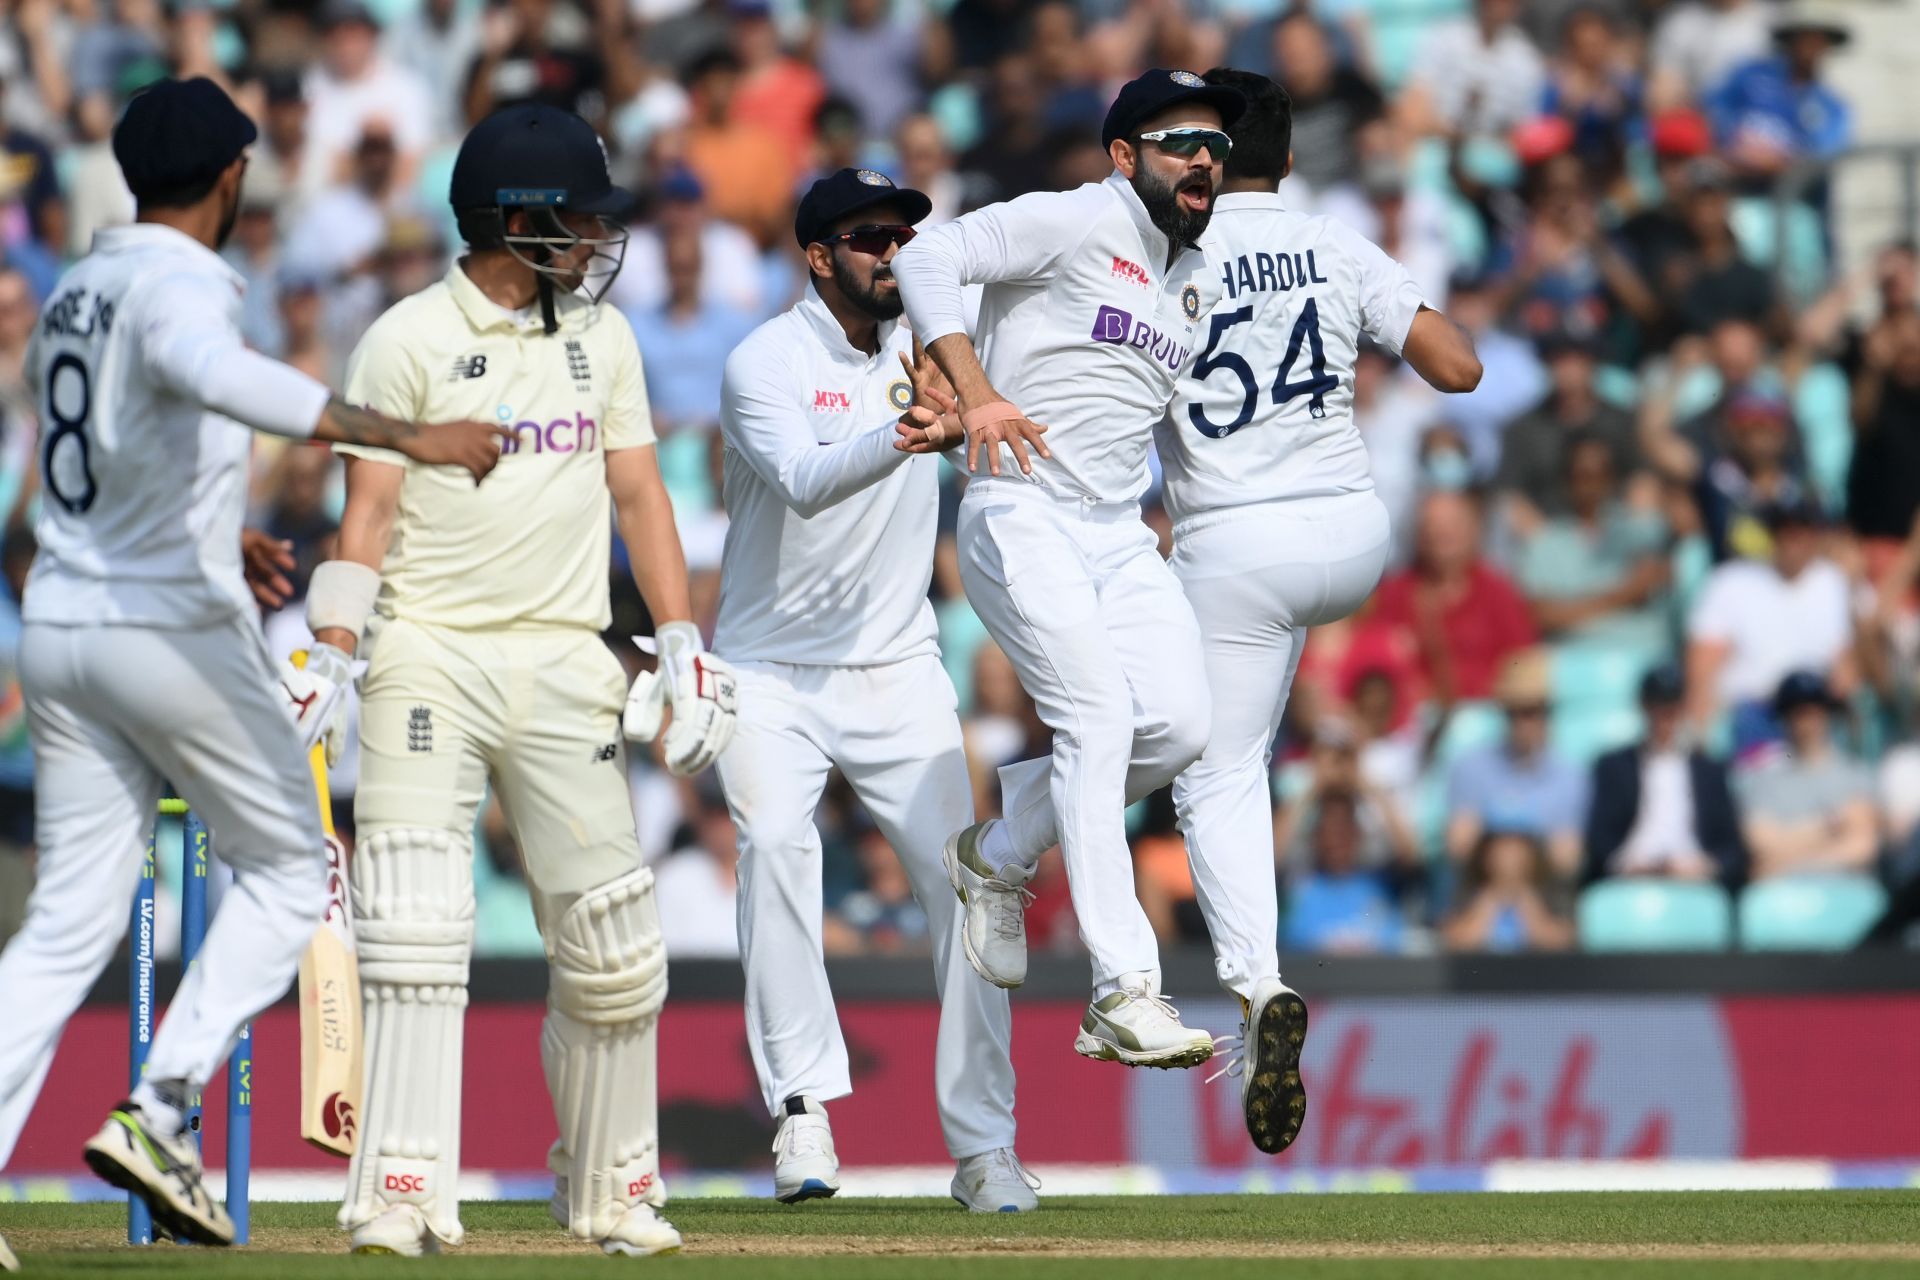 India will play England in the rescheduled 5th Test at Edgbaston in 2022